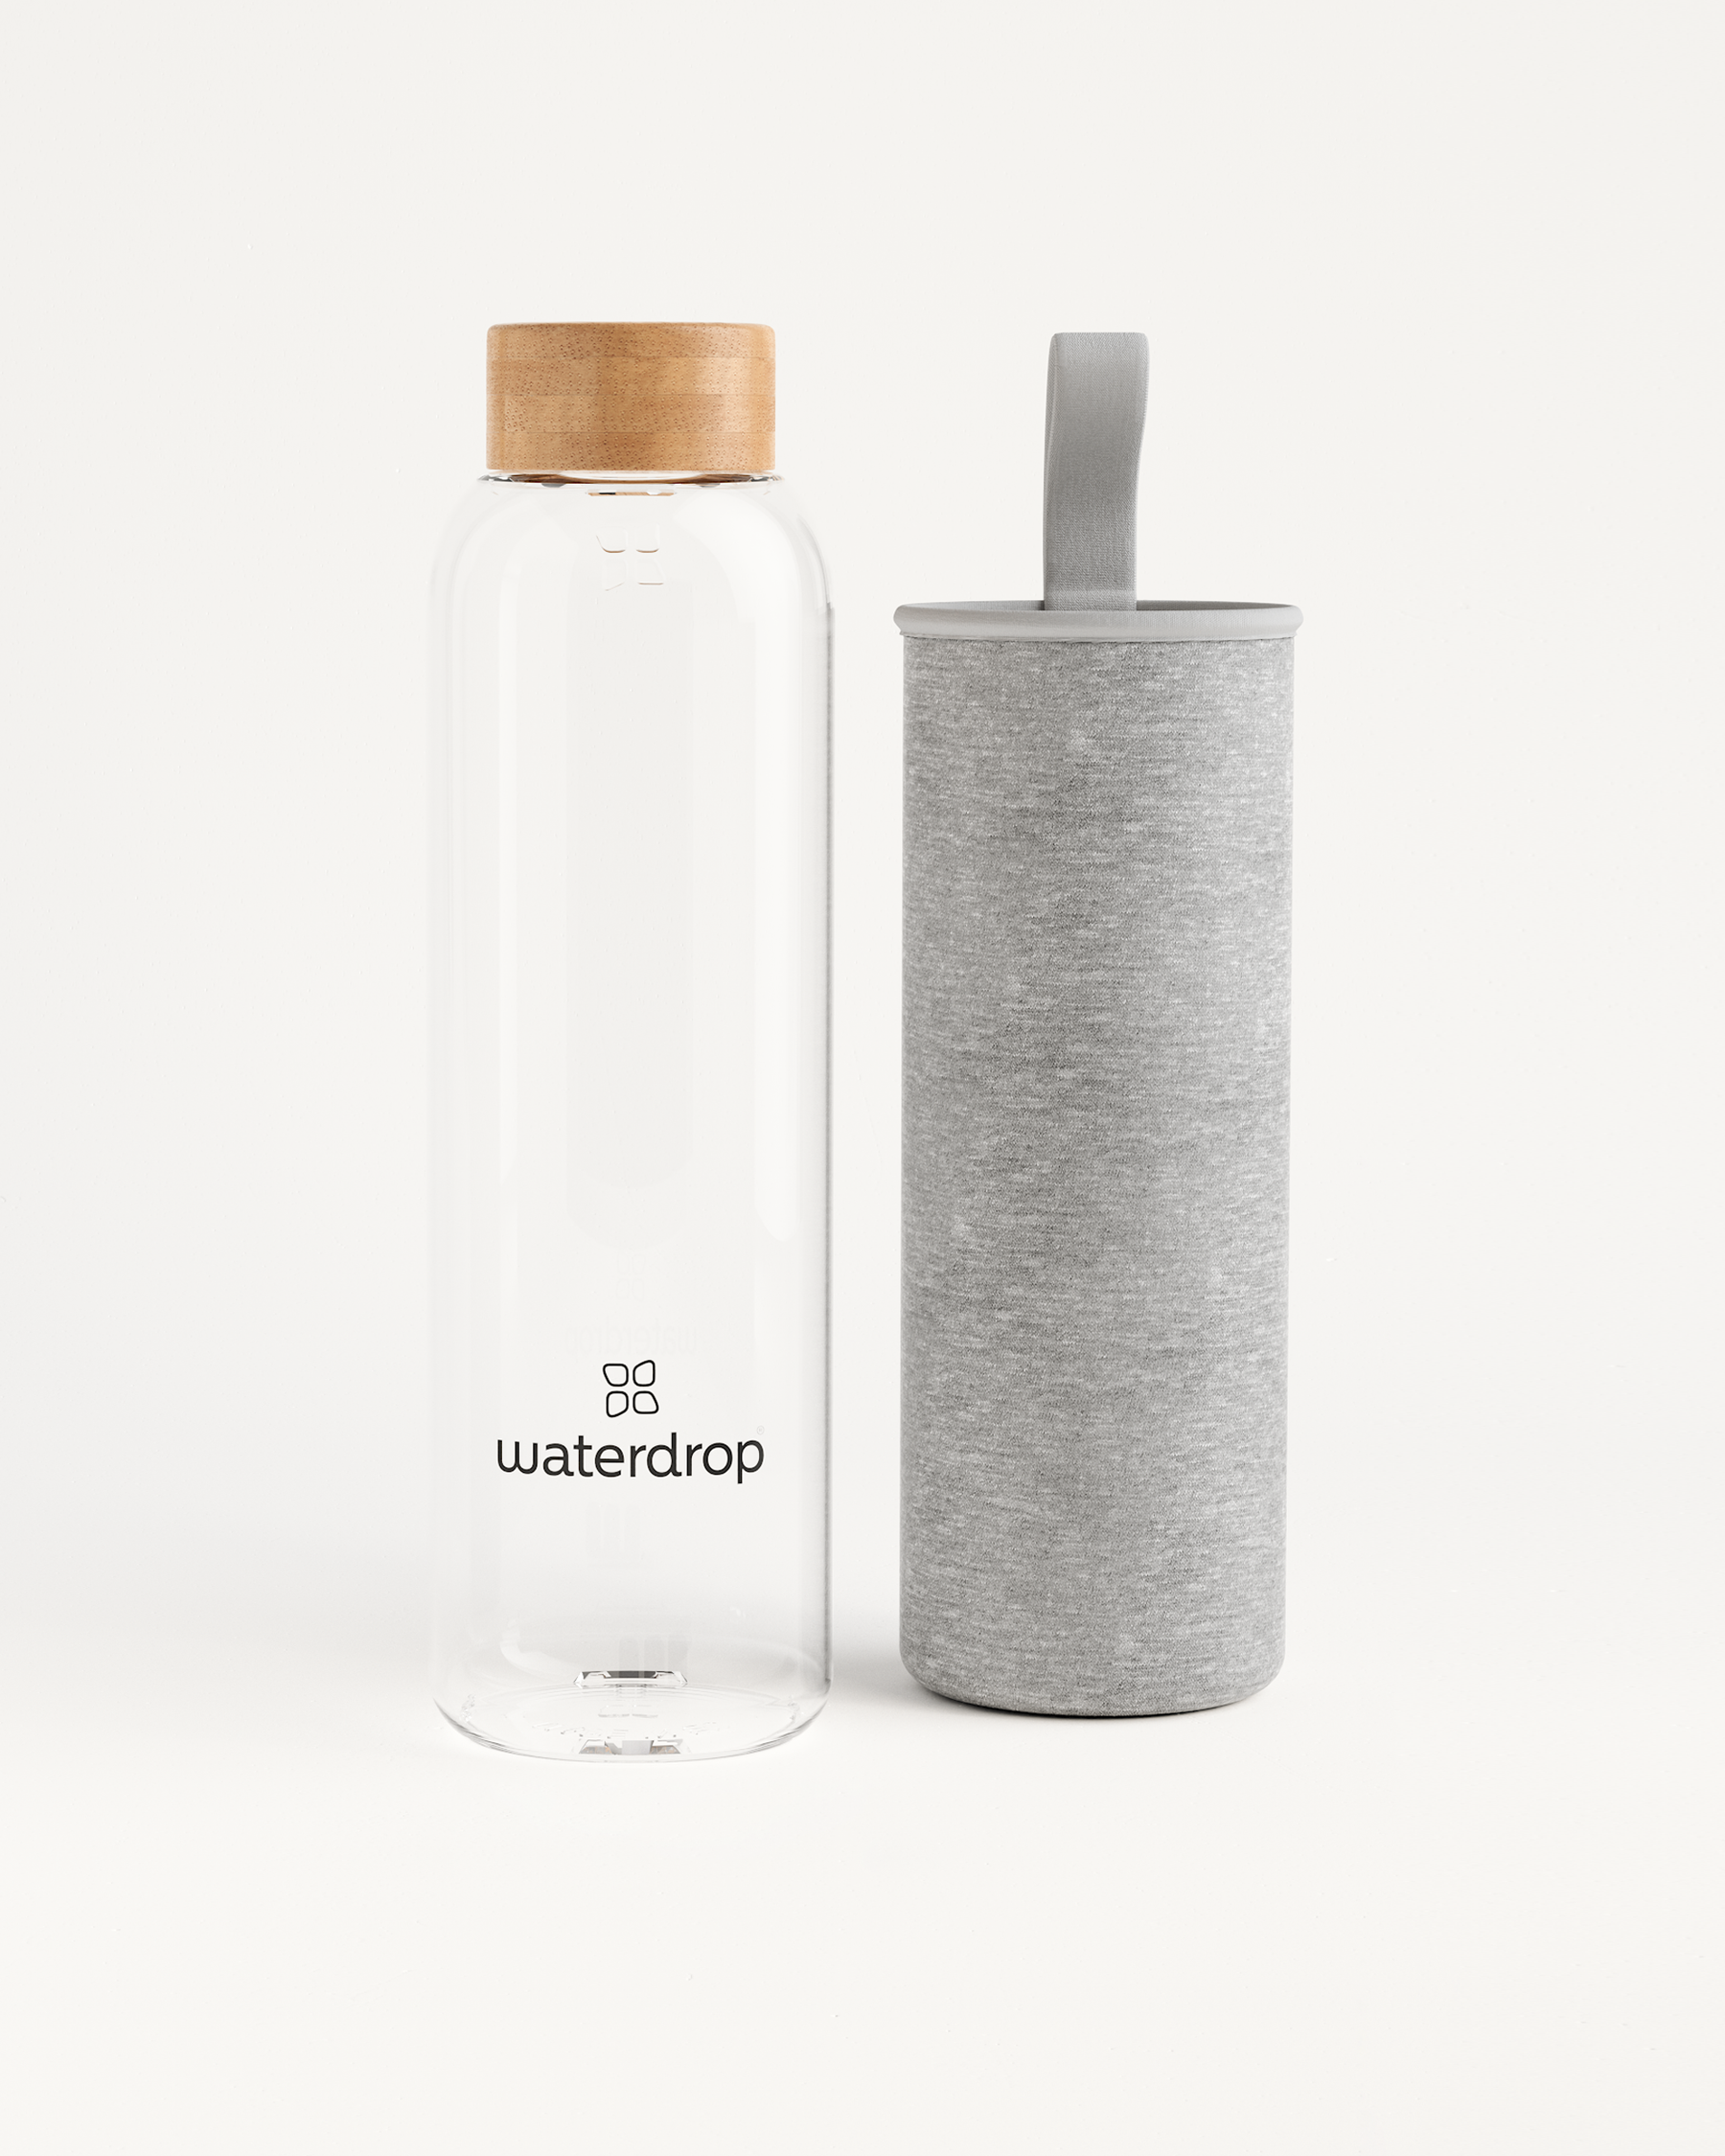 Clear Glass Water Bottle: Order now